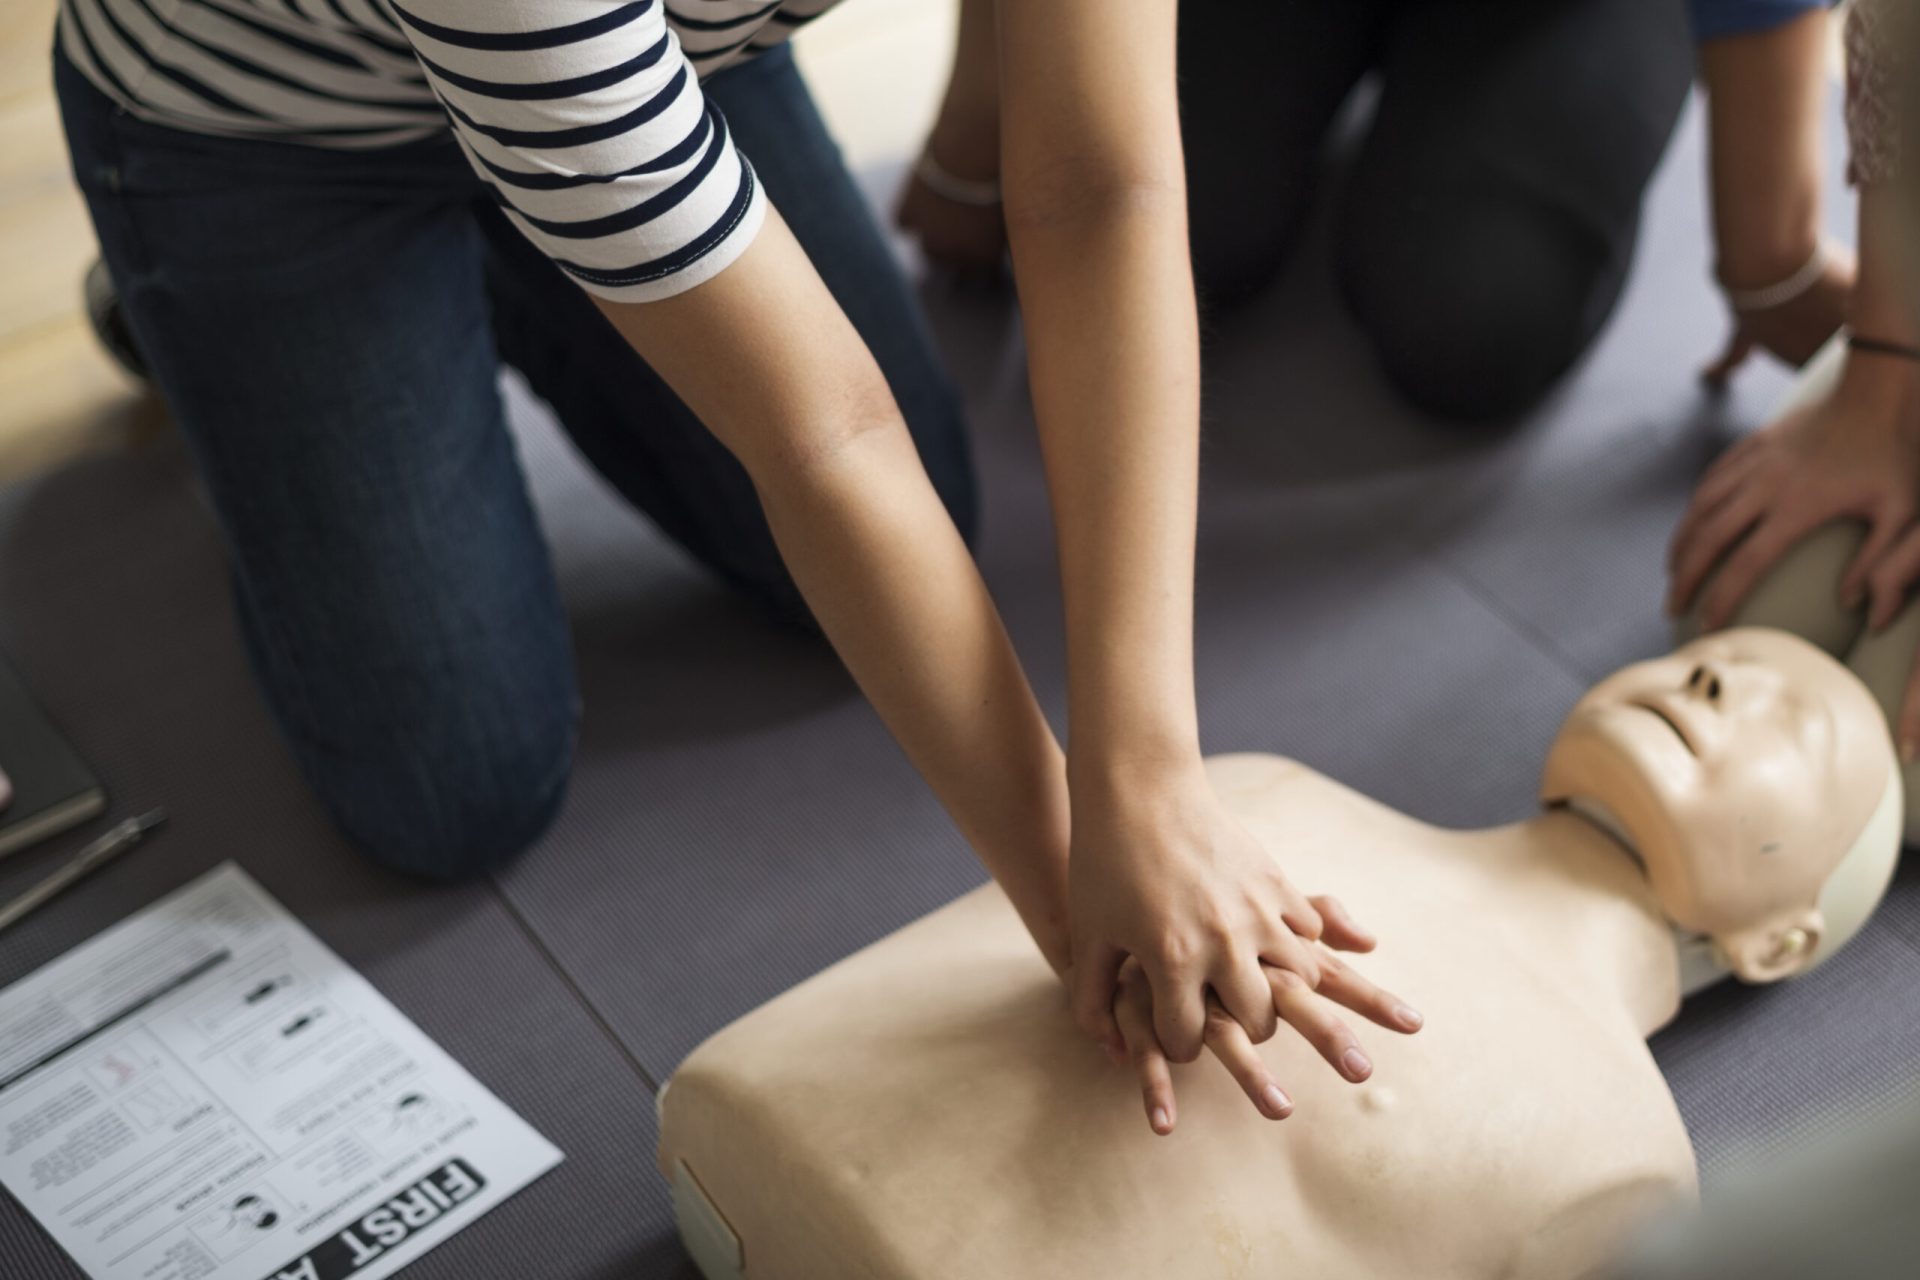 cpr training scaled IFSO